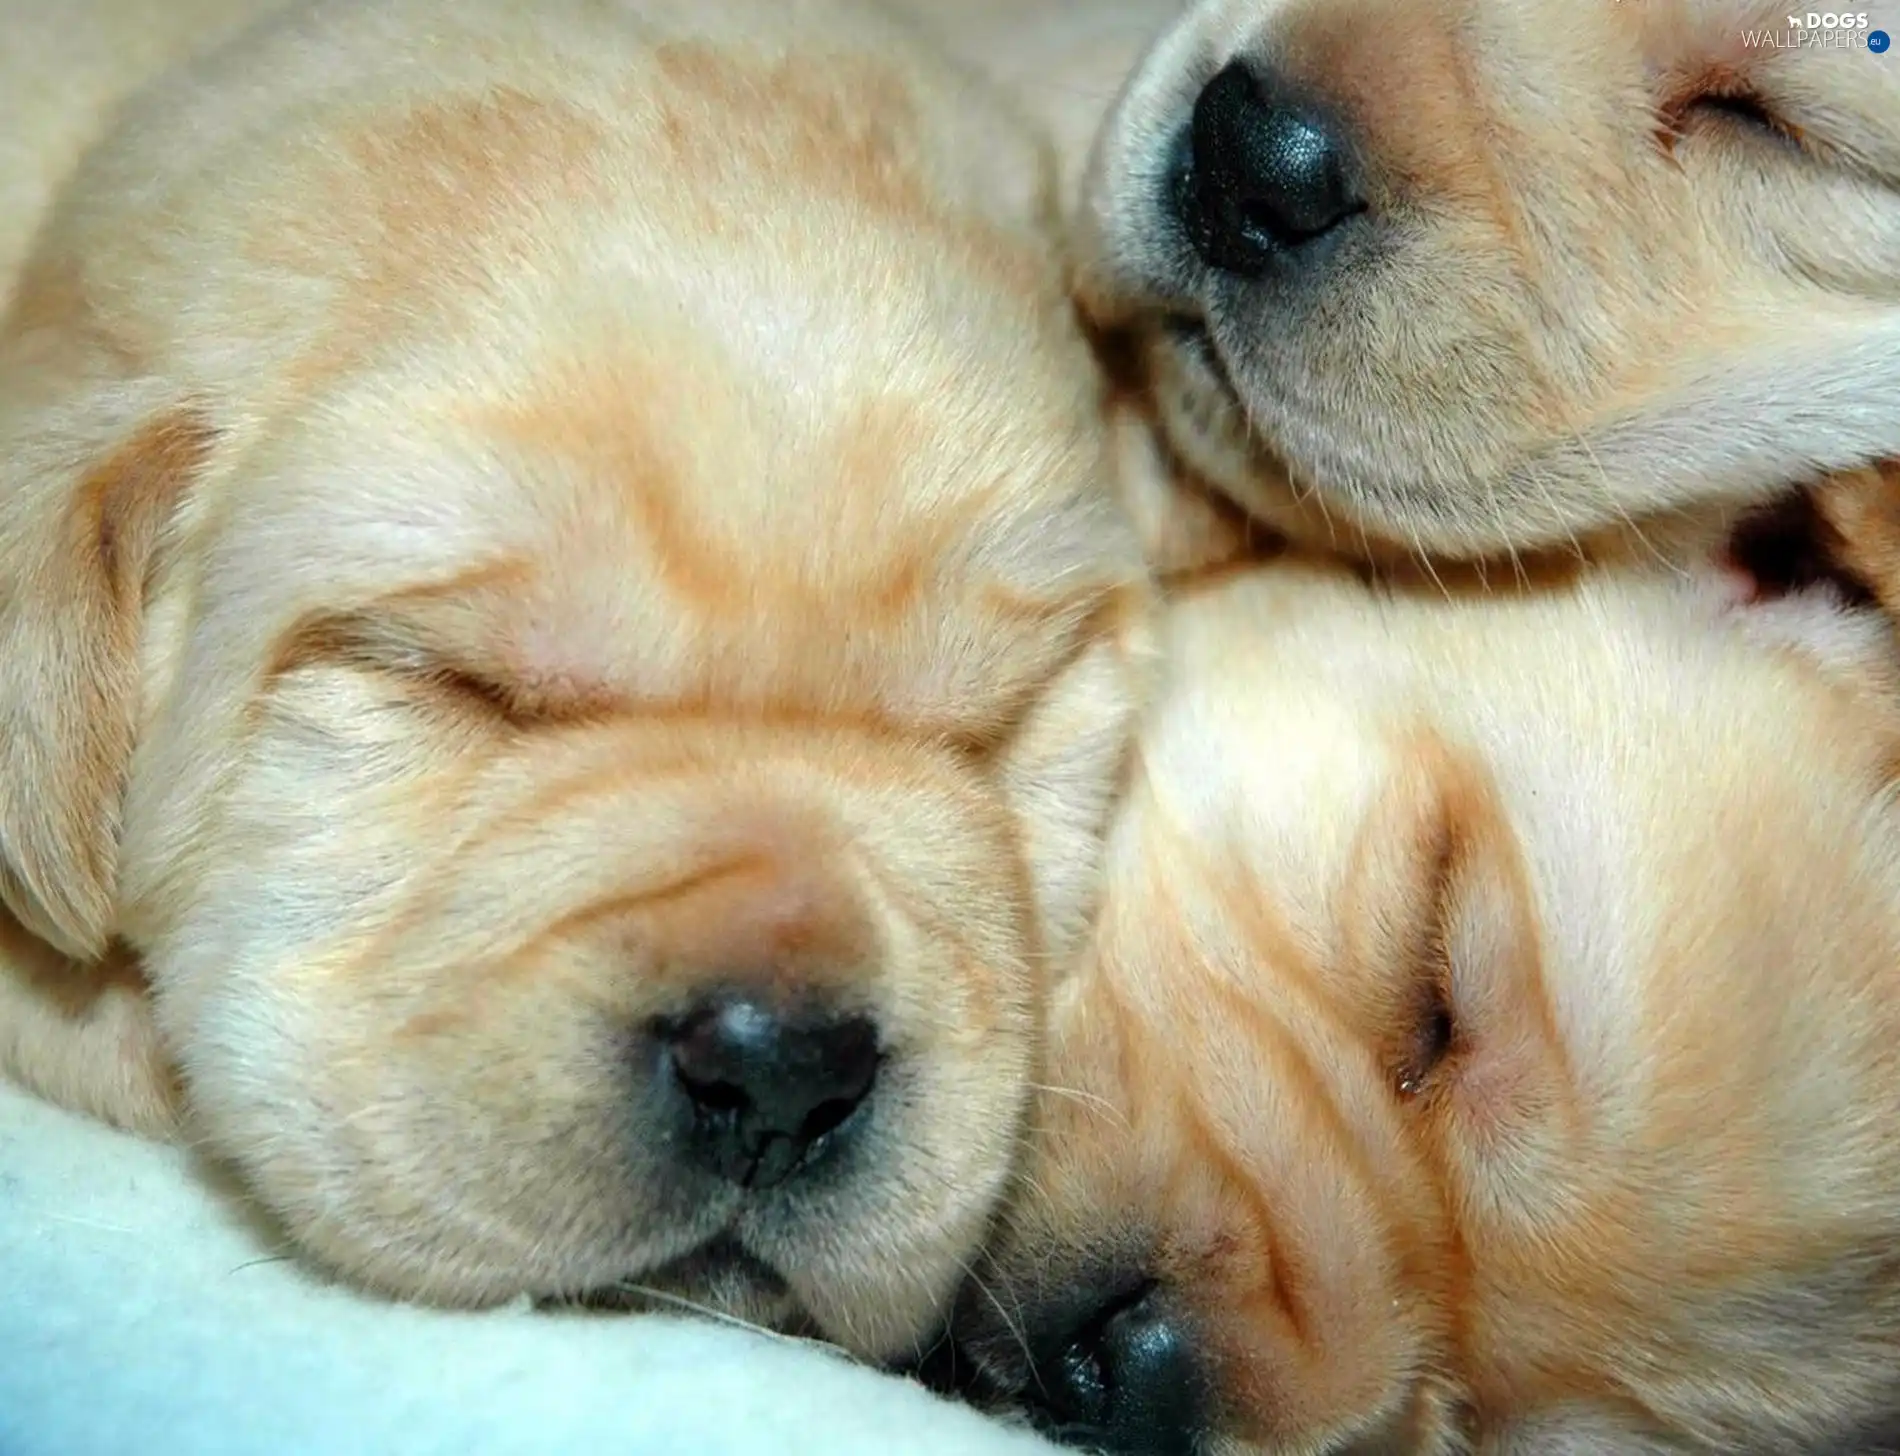 mouths, dream, Puppies